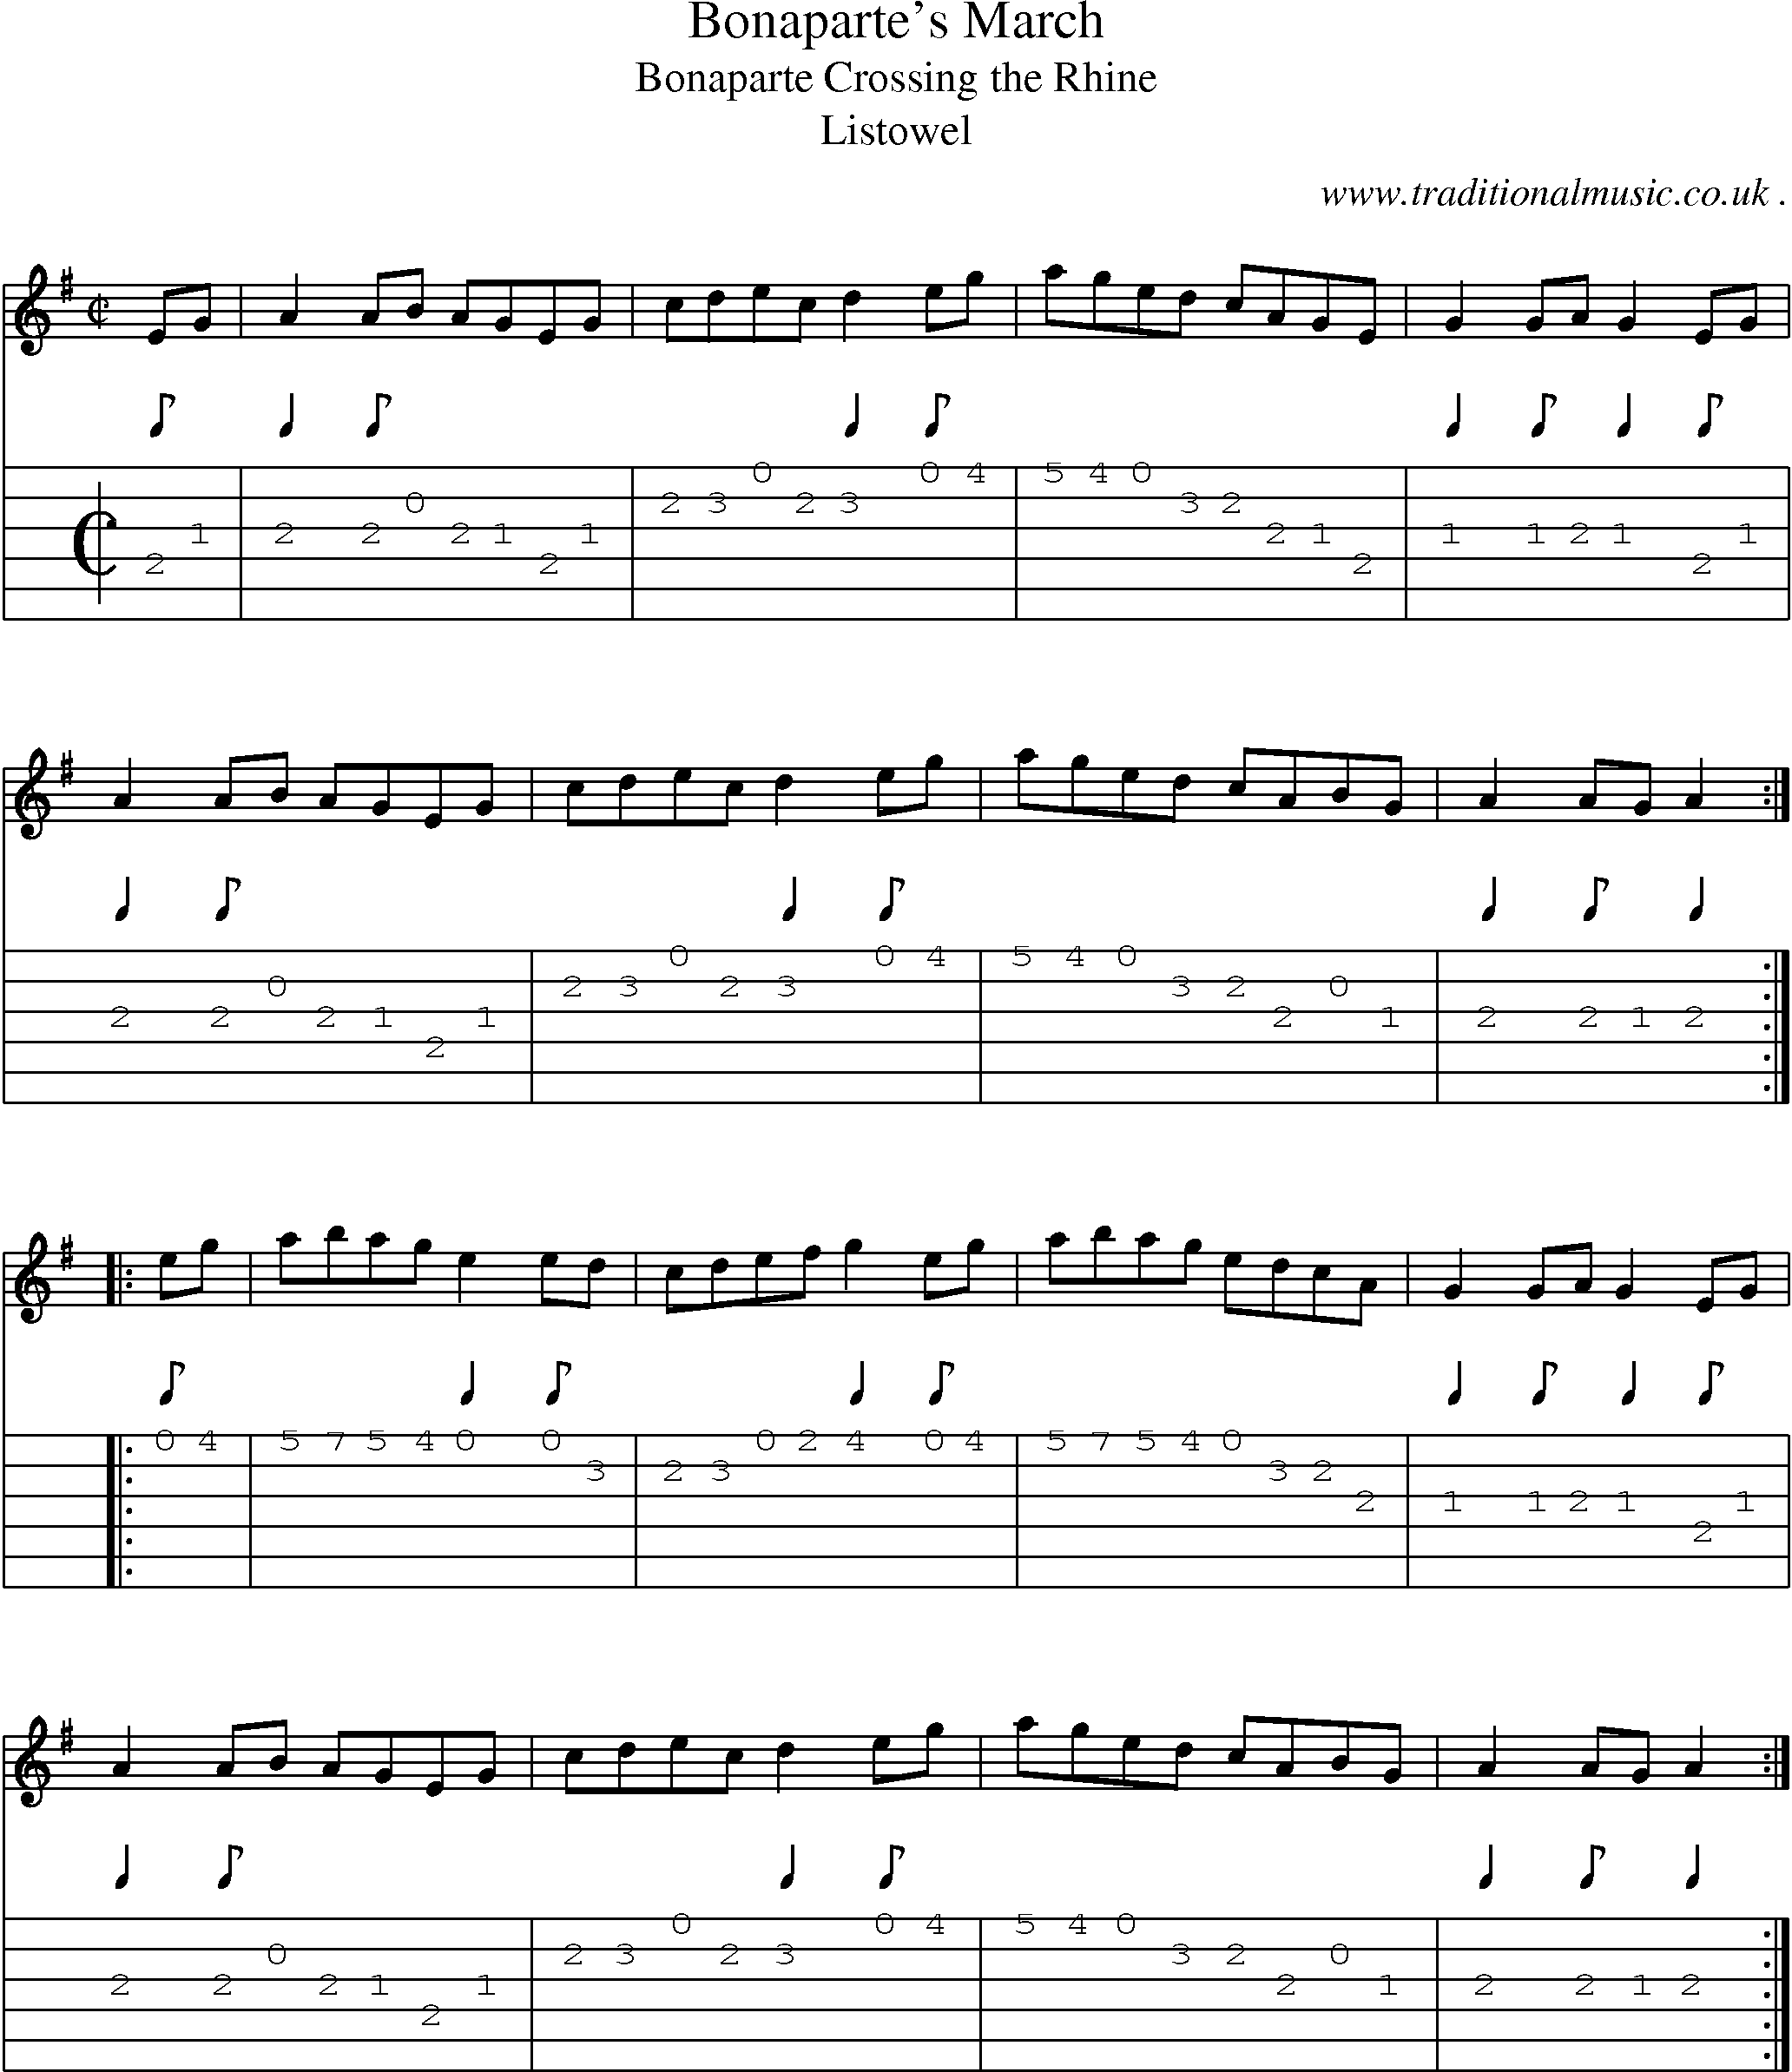 Sheet-Music and Guitar Tabs for Bonapartes March